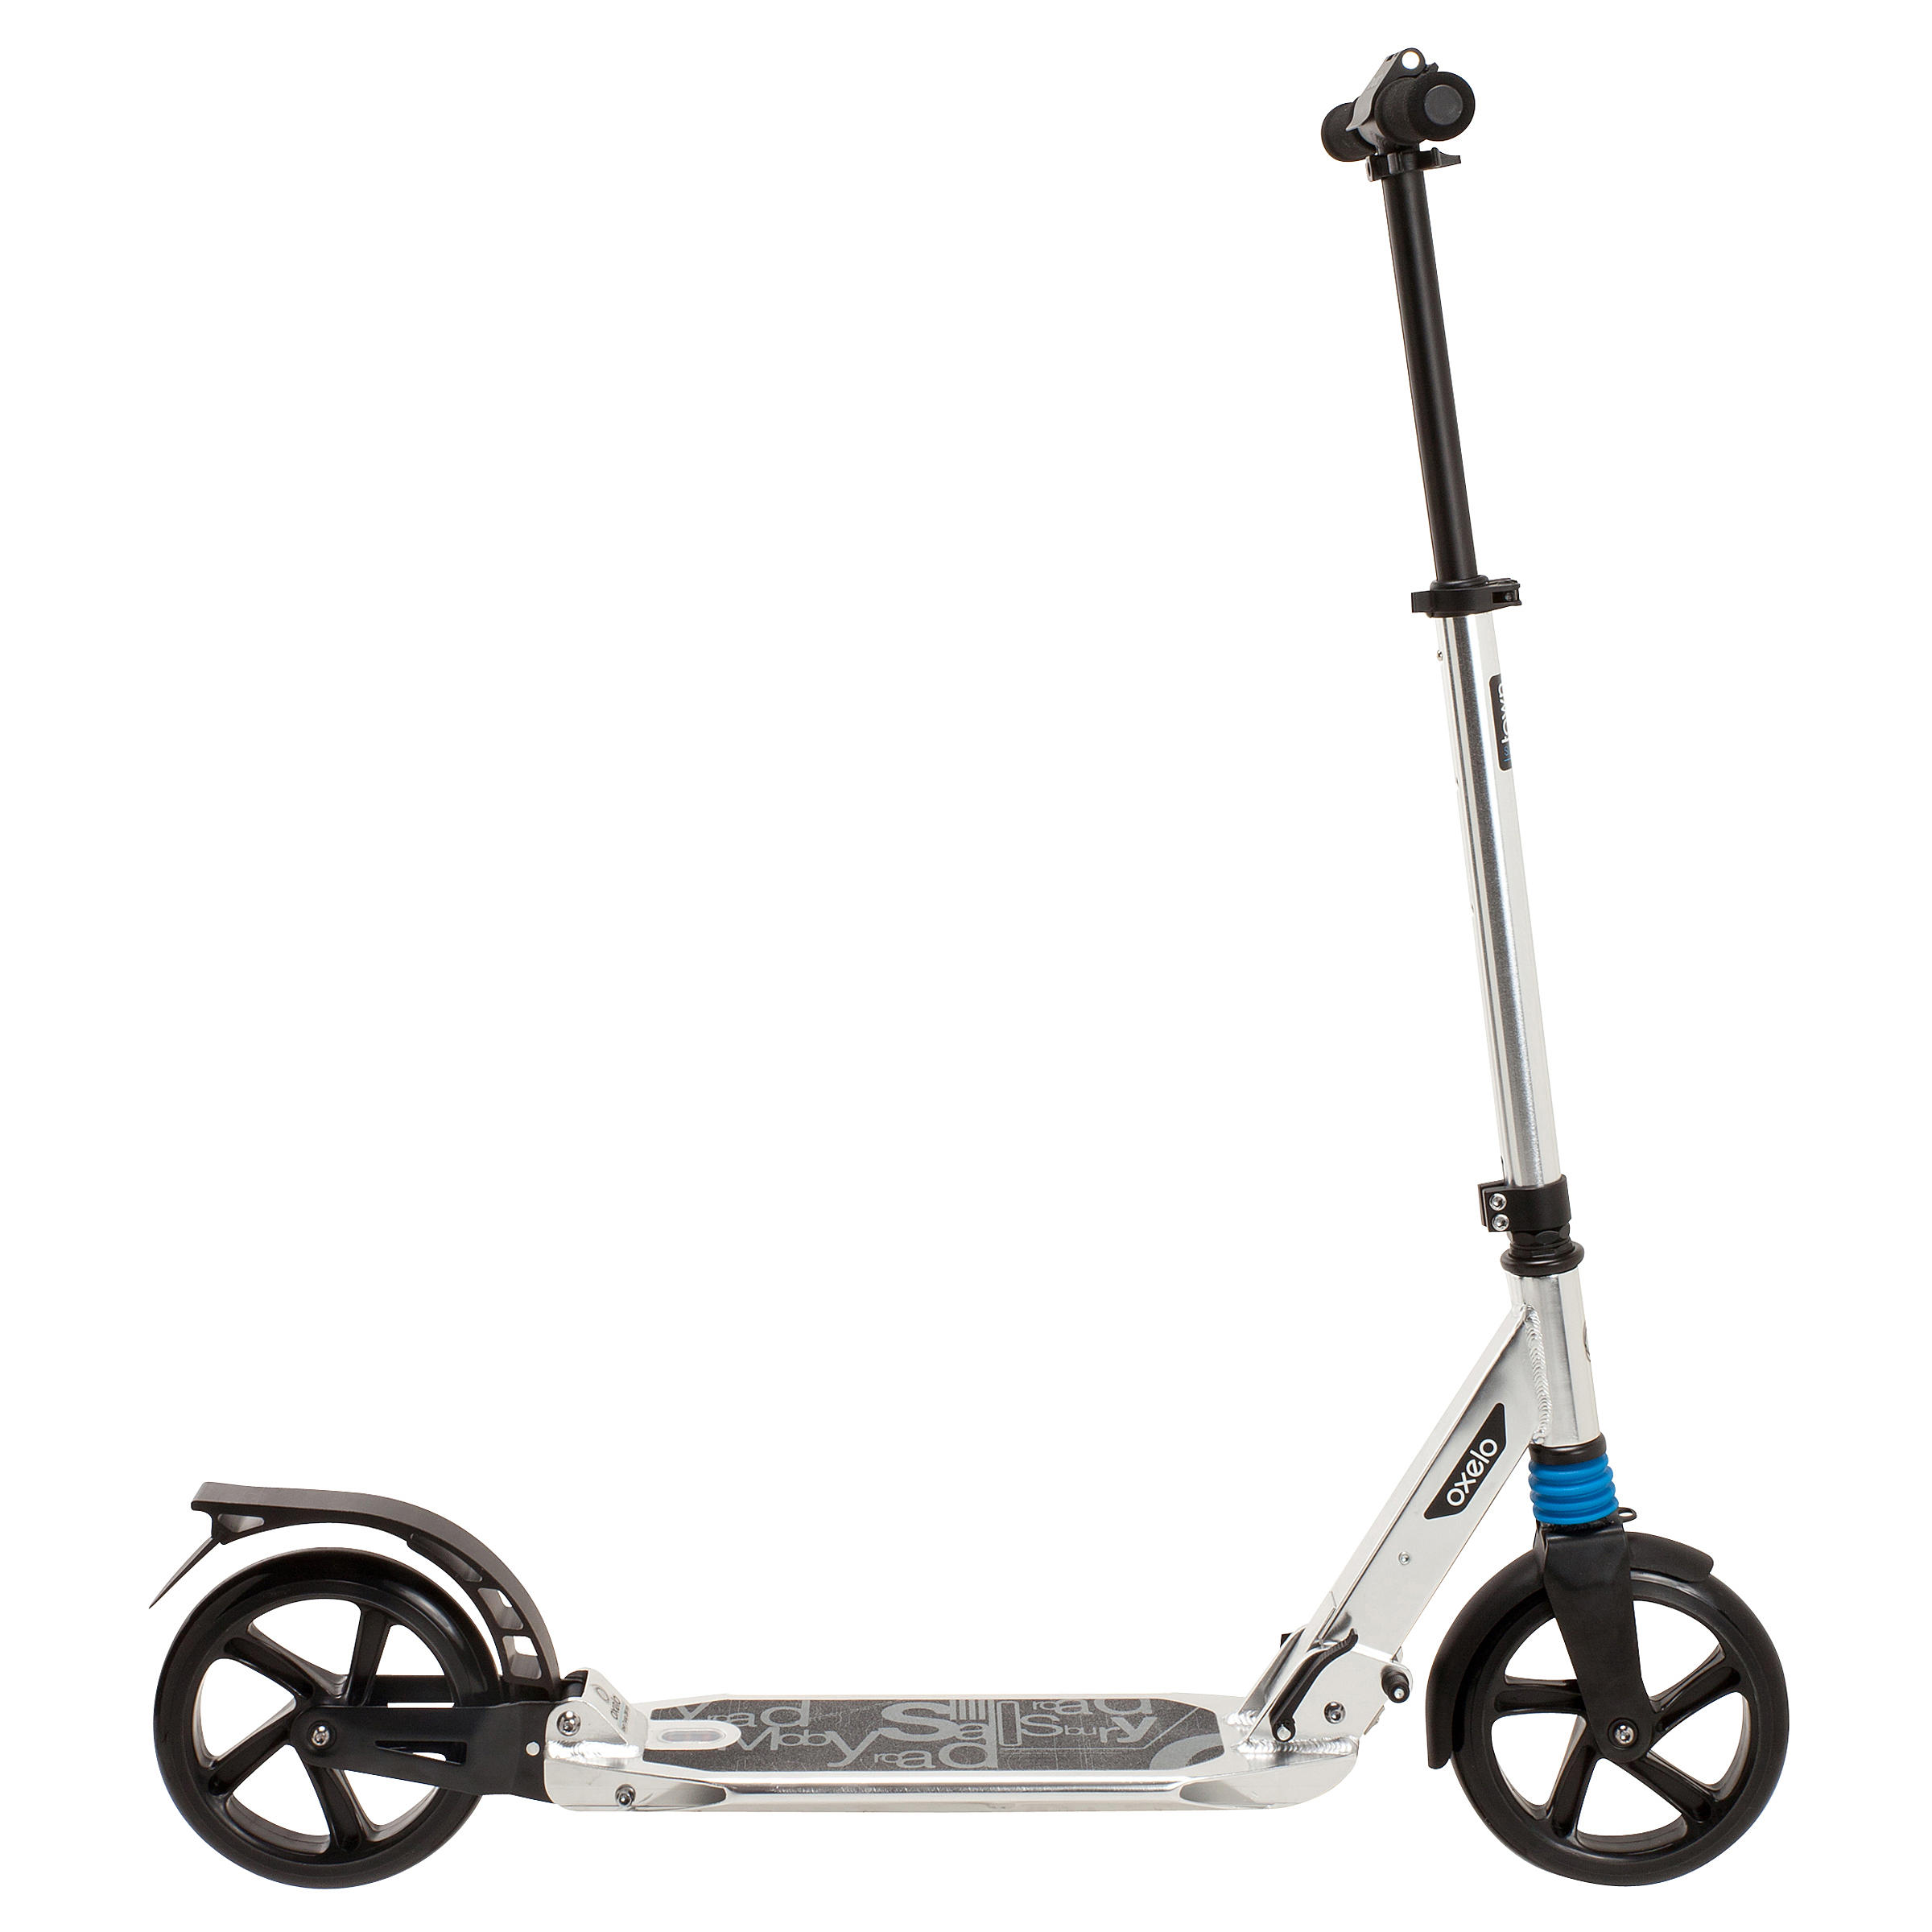 Town7 XL Adult Scooter - Chrome 3/8